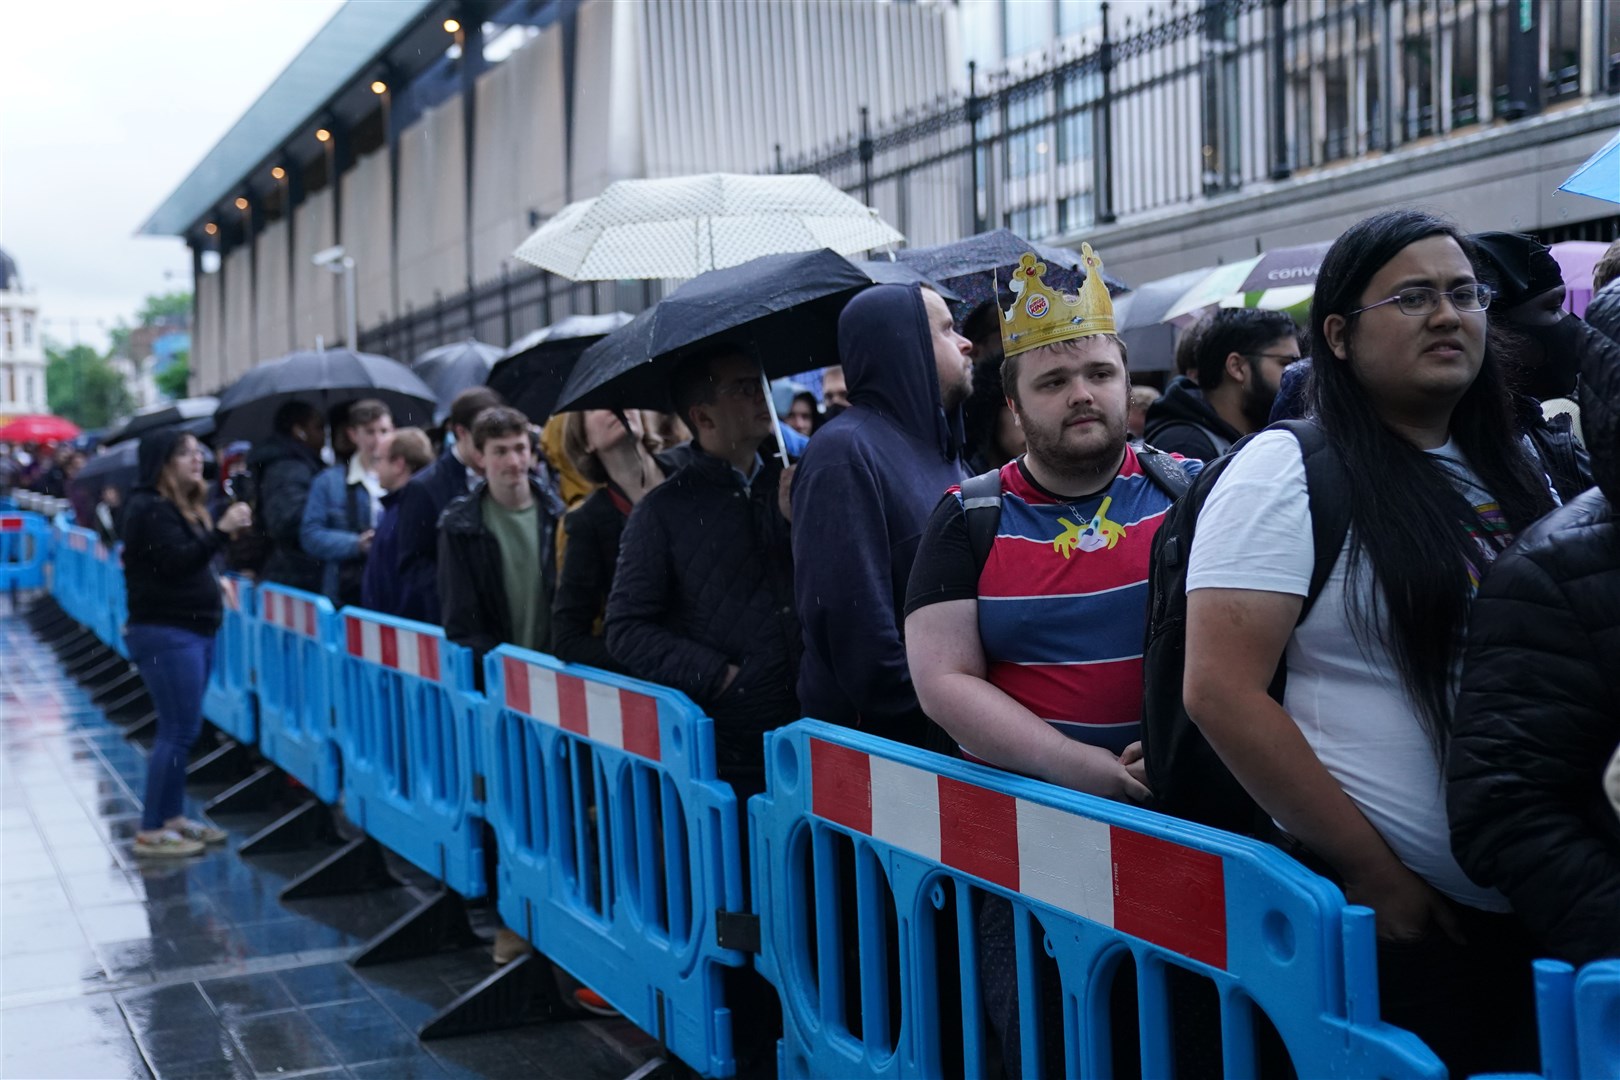 Crowds wait in line to board the first Elizabeth line train to carry passengers at Paddington Station, London (Kirsty O’Connor/PA)